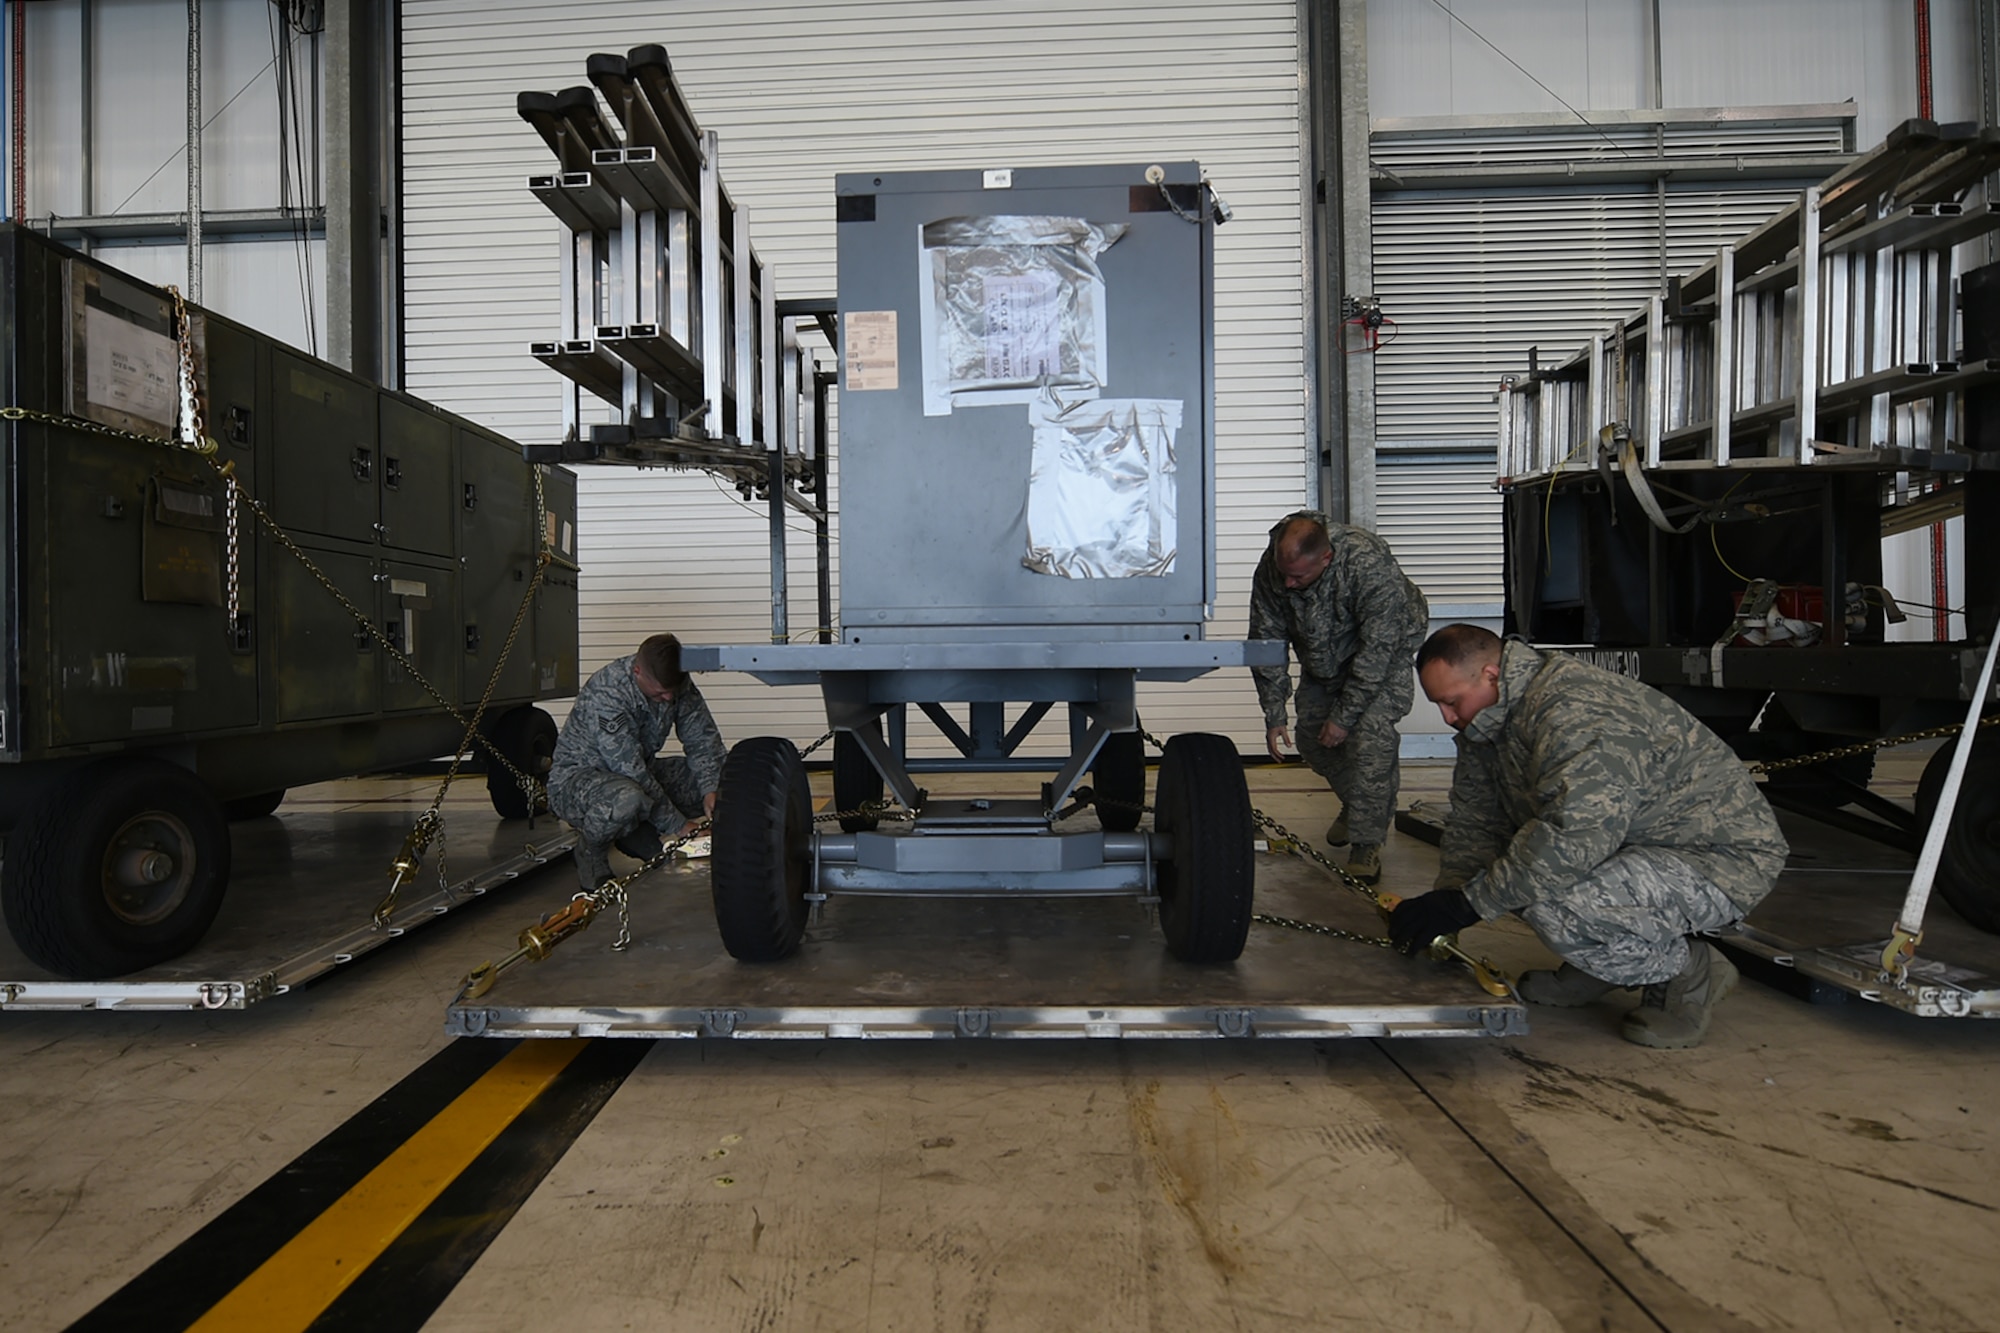 U.S. Air Force Airmen assigned to the 345th Expeditionary Bomb Squadron from Dyess Air Force Base, Texas, de-palletize equipment at RAF Fairford, U.K., May 24, 2018. Members of the 345th EBS will be supporting multiple NATO cross-servicing exercises while forward operating out of RAF Fairford. U.S. Strategic Command bomber units regularly train in support of geographic combatant commands, including U.S. European Command. The flights and training provide opportunities for bomber crews to integrate and train with allies and partners from across the globe. (U.S. Air Force photo by Senior Airman Emily Copeland)